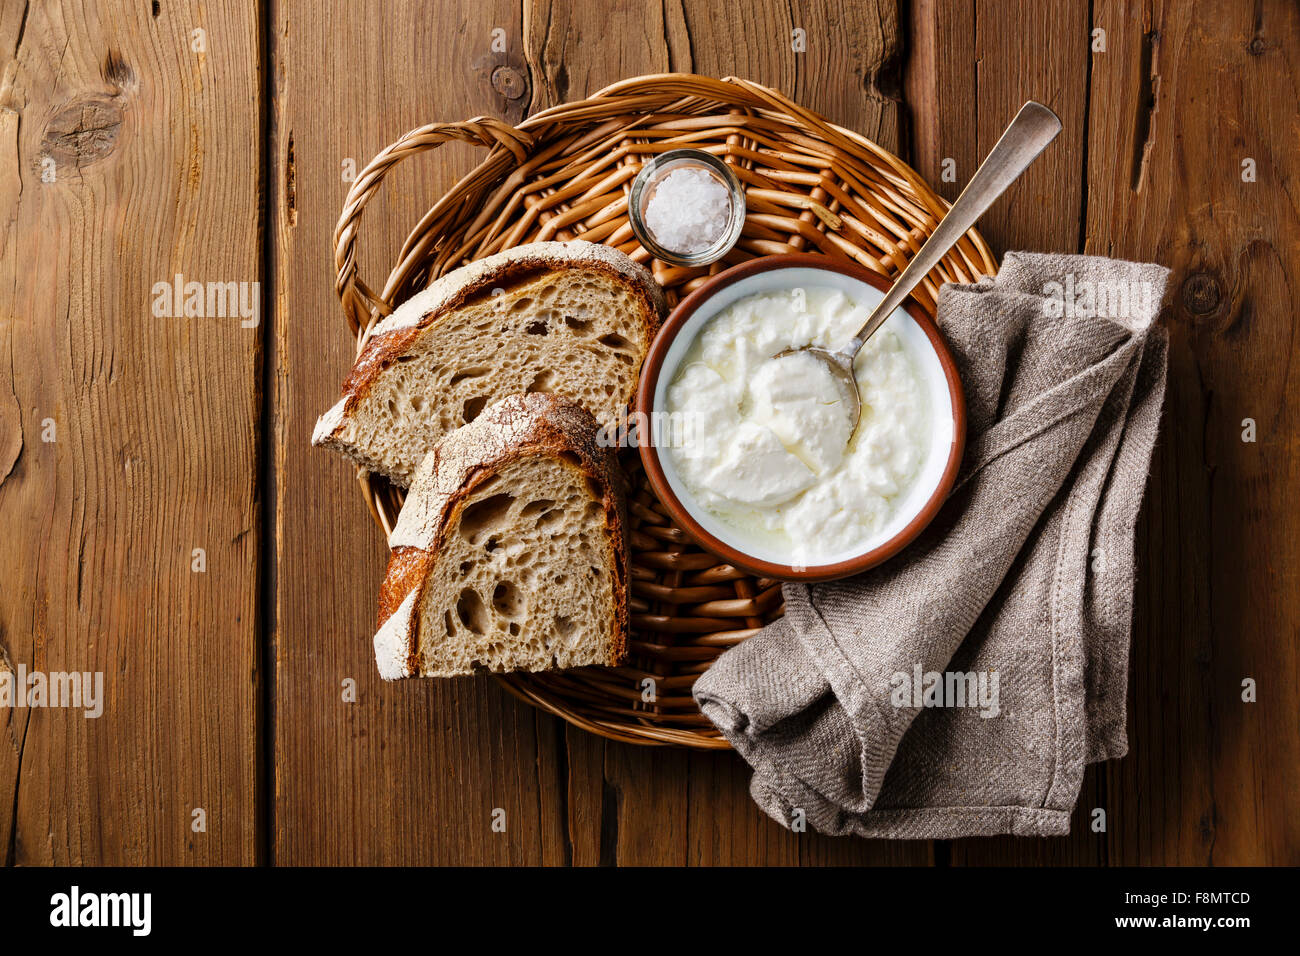 Clabber sour milk and brown rye bread on wicker tray on wooden background Stock Photo